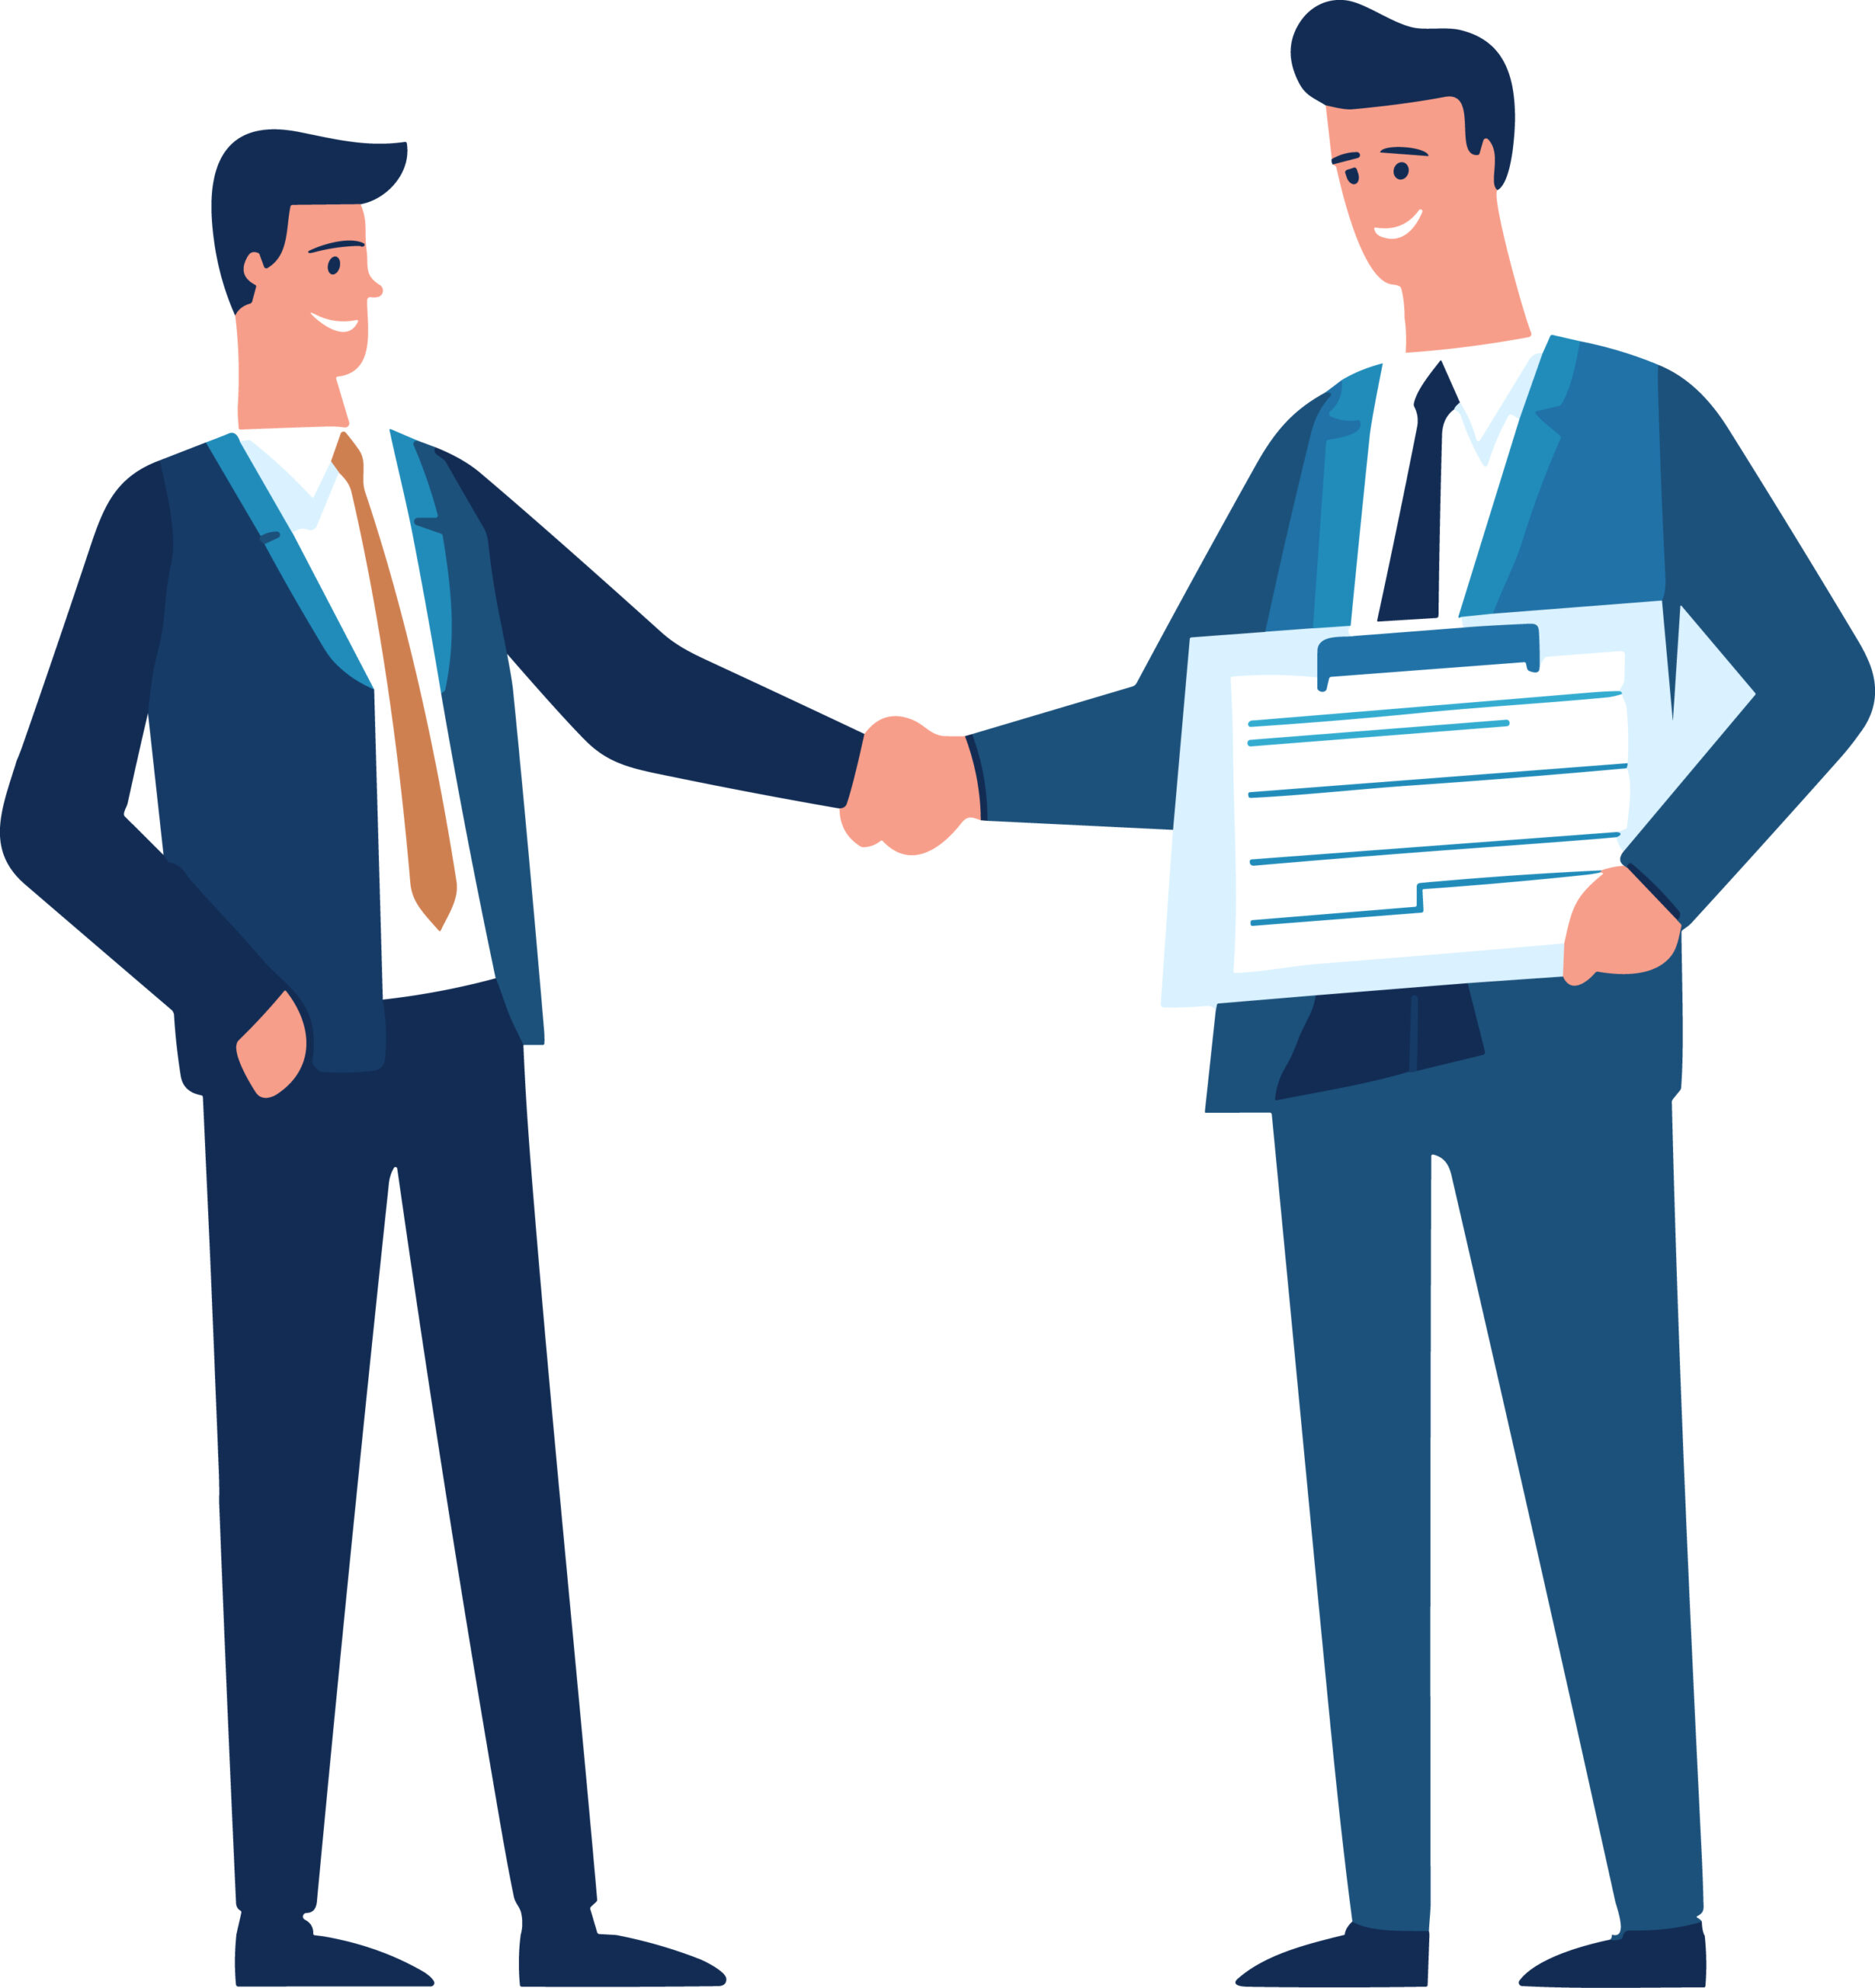 Stalkus Digital executive shaking hand as a trusted a partner